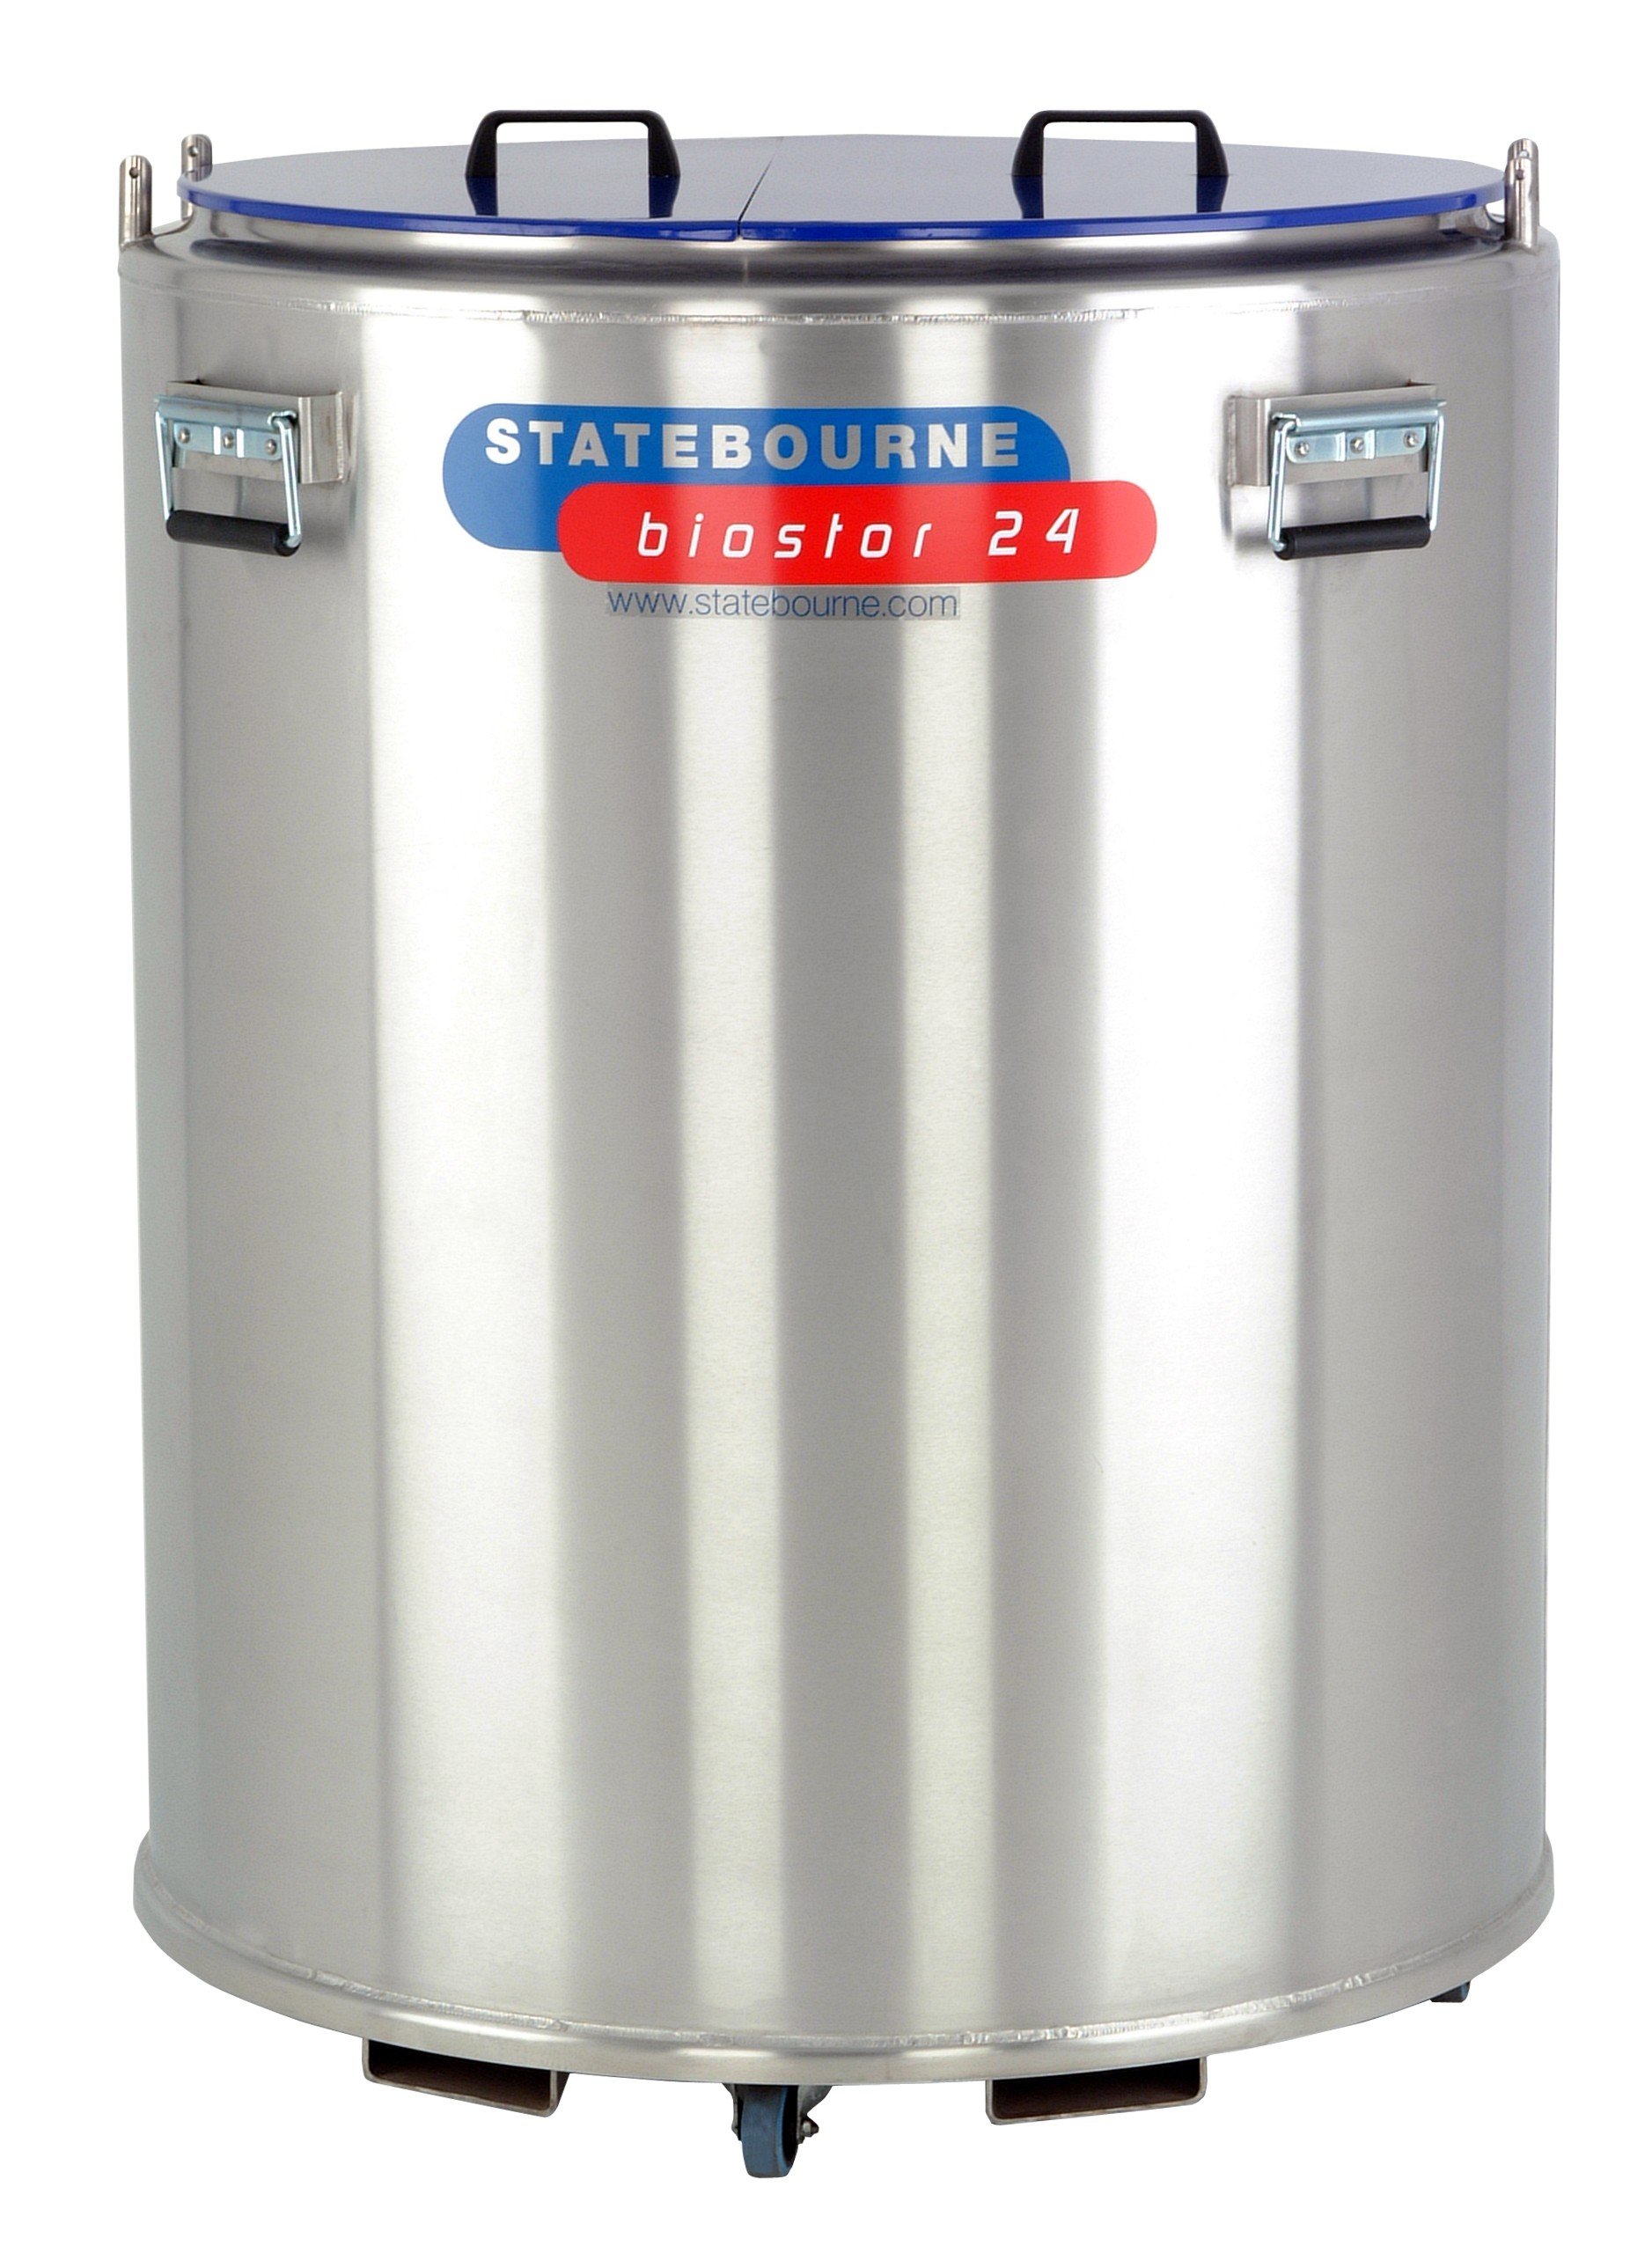 Statebourne Cryogenics 9916065 Biostor 24 Wide Neck Refrigerator , 380 Litres, supplied with built in liquid nitrogen fill and level sensor tubes